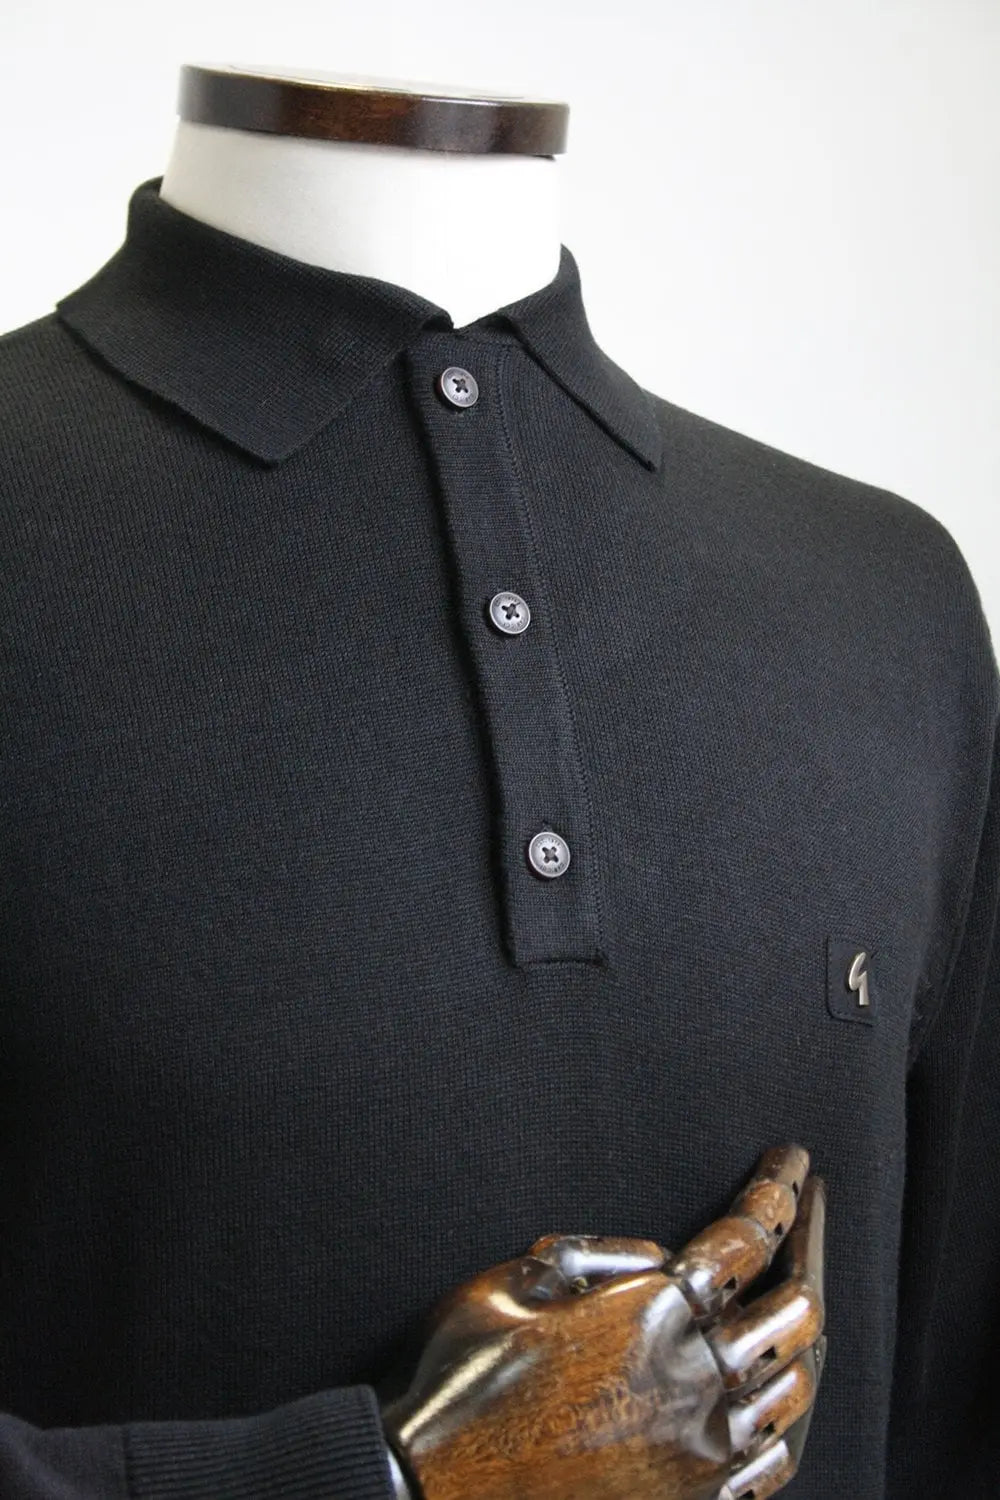 Gabicci Vintage Francesco Black Long-Sleeved Knitted Polo Shirt From Woven Durham